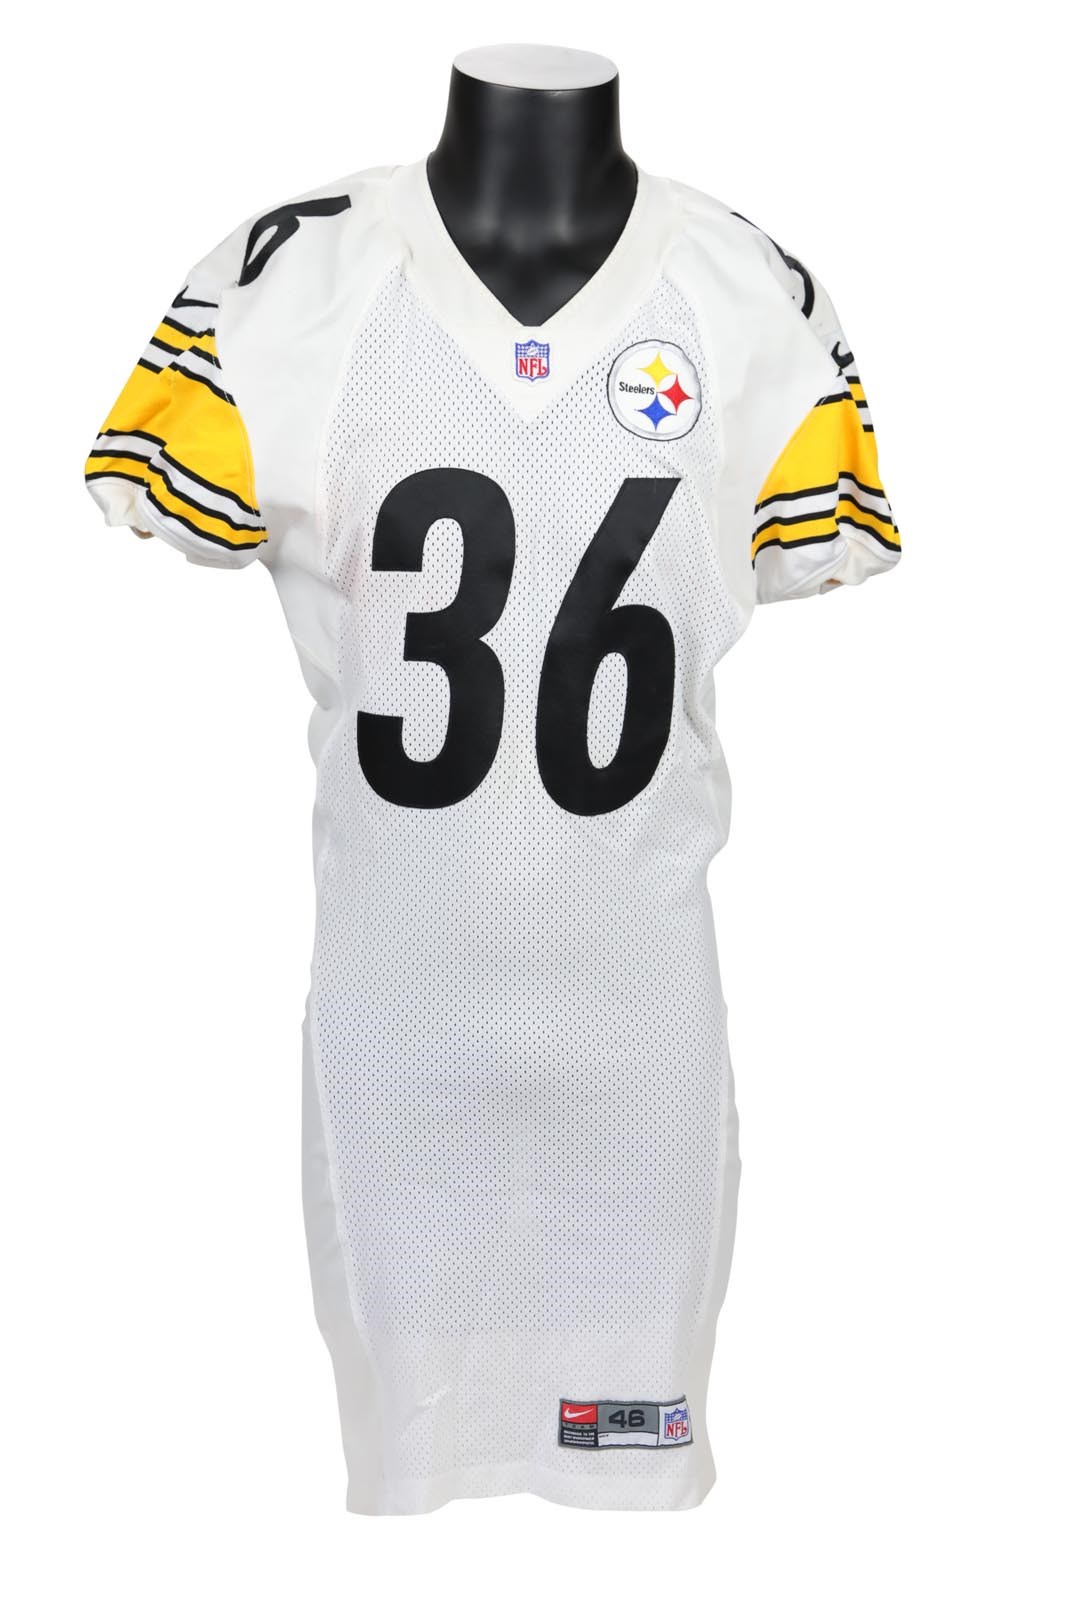 The Pittsburgh Steelers Game Worn Jersey Archive - 2000 Jerome Bettis Game Worn Pittsburgh Steelers "Touchdown" Jersey (Photo-Matched to Four Games, Steelers COA)